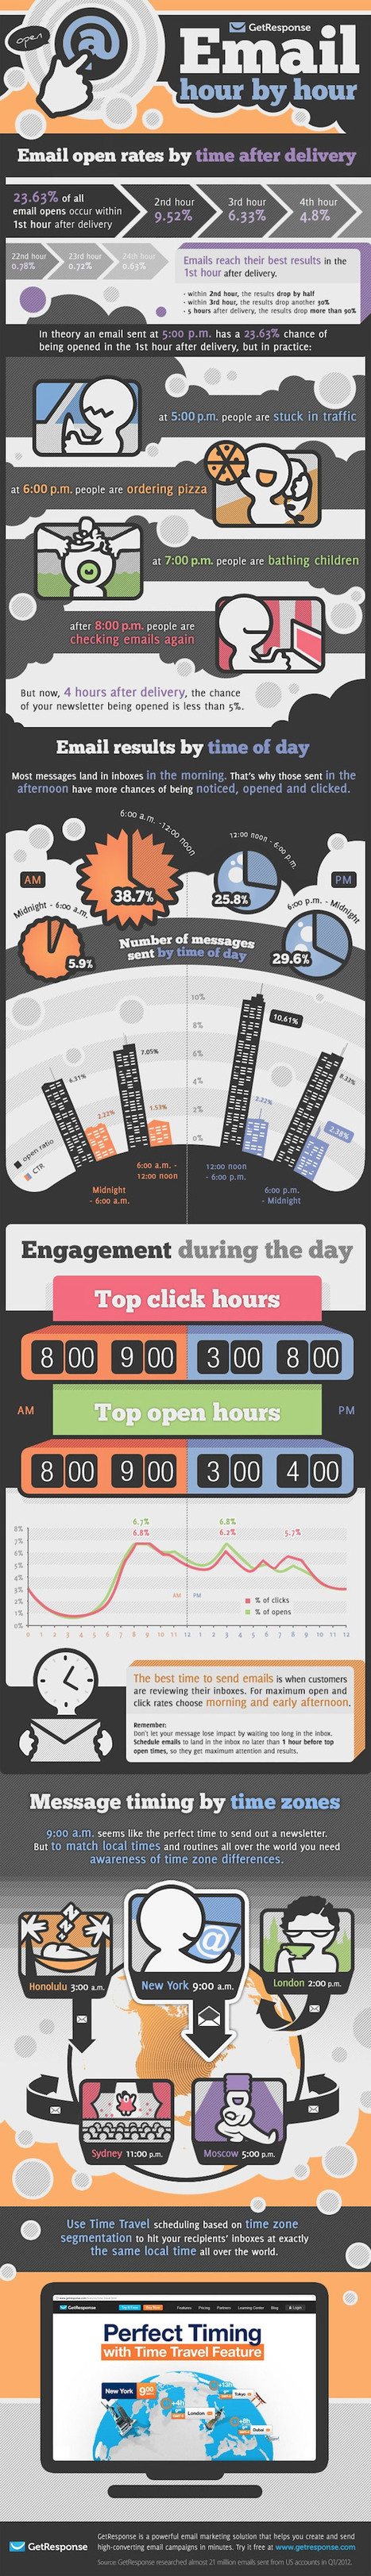 The Best Time Of The Day To Send Emails [INFOGRAPHIC] | Content on content | Scoop.it